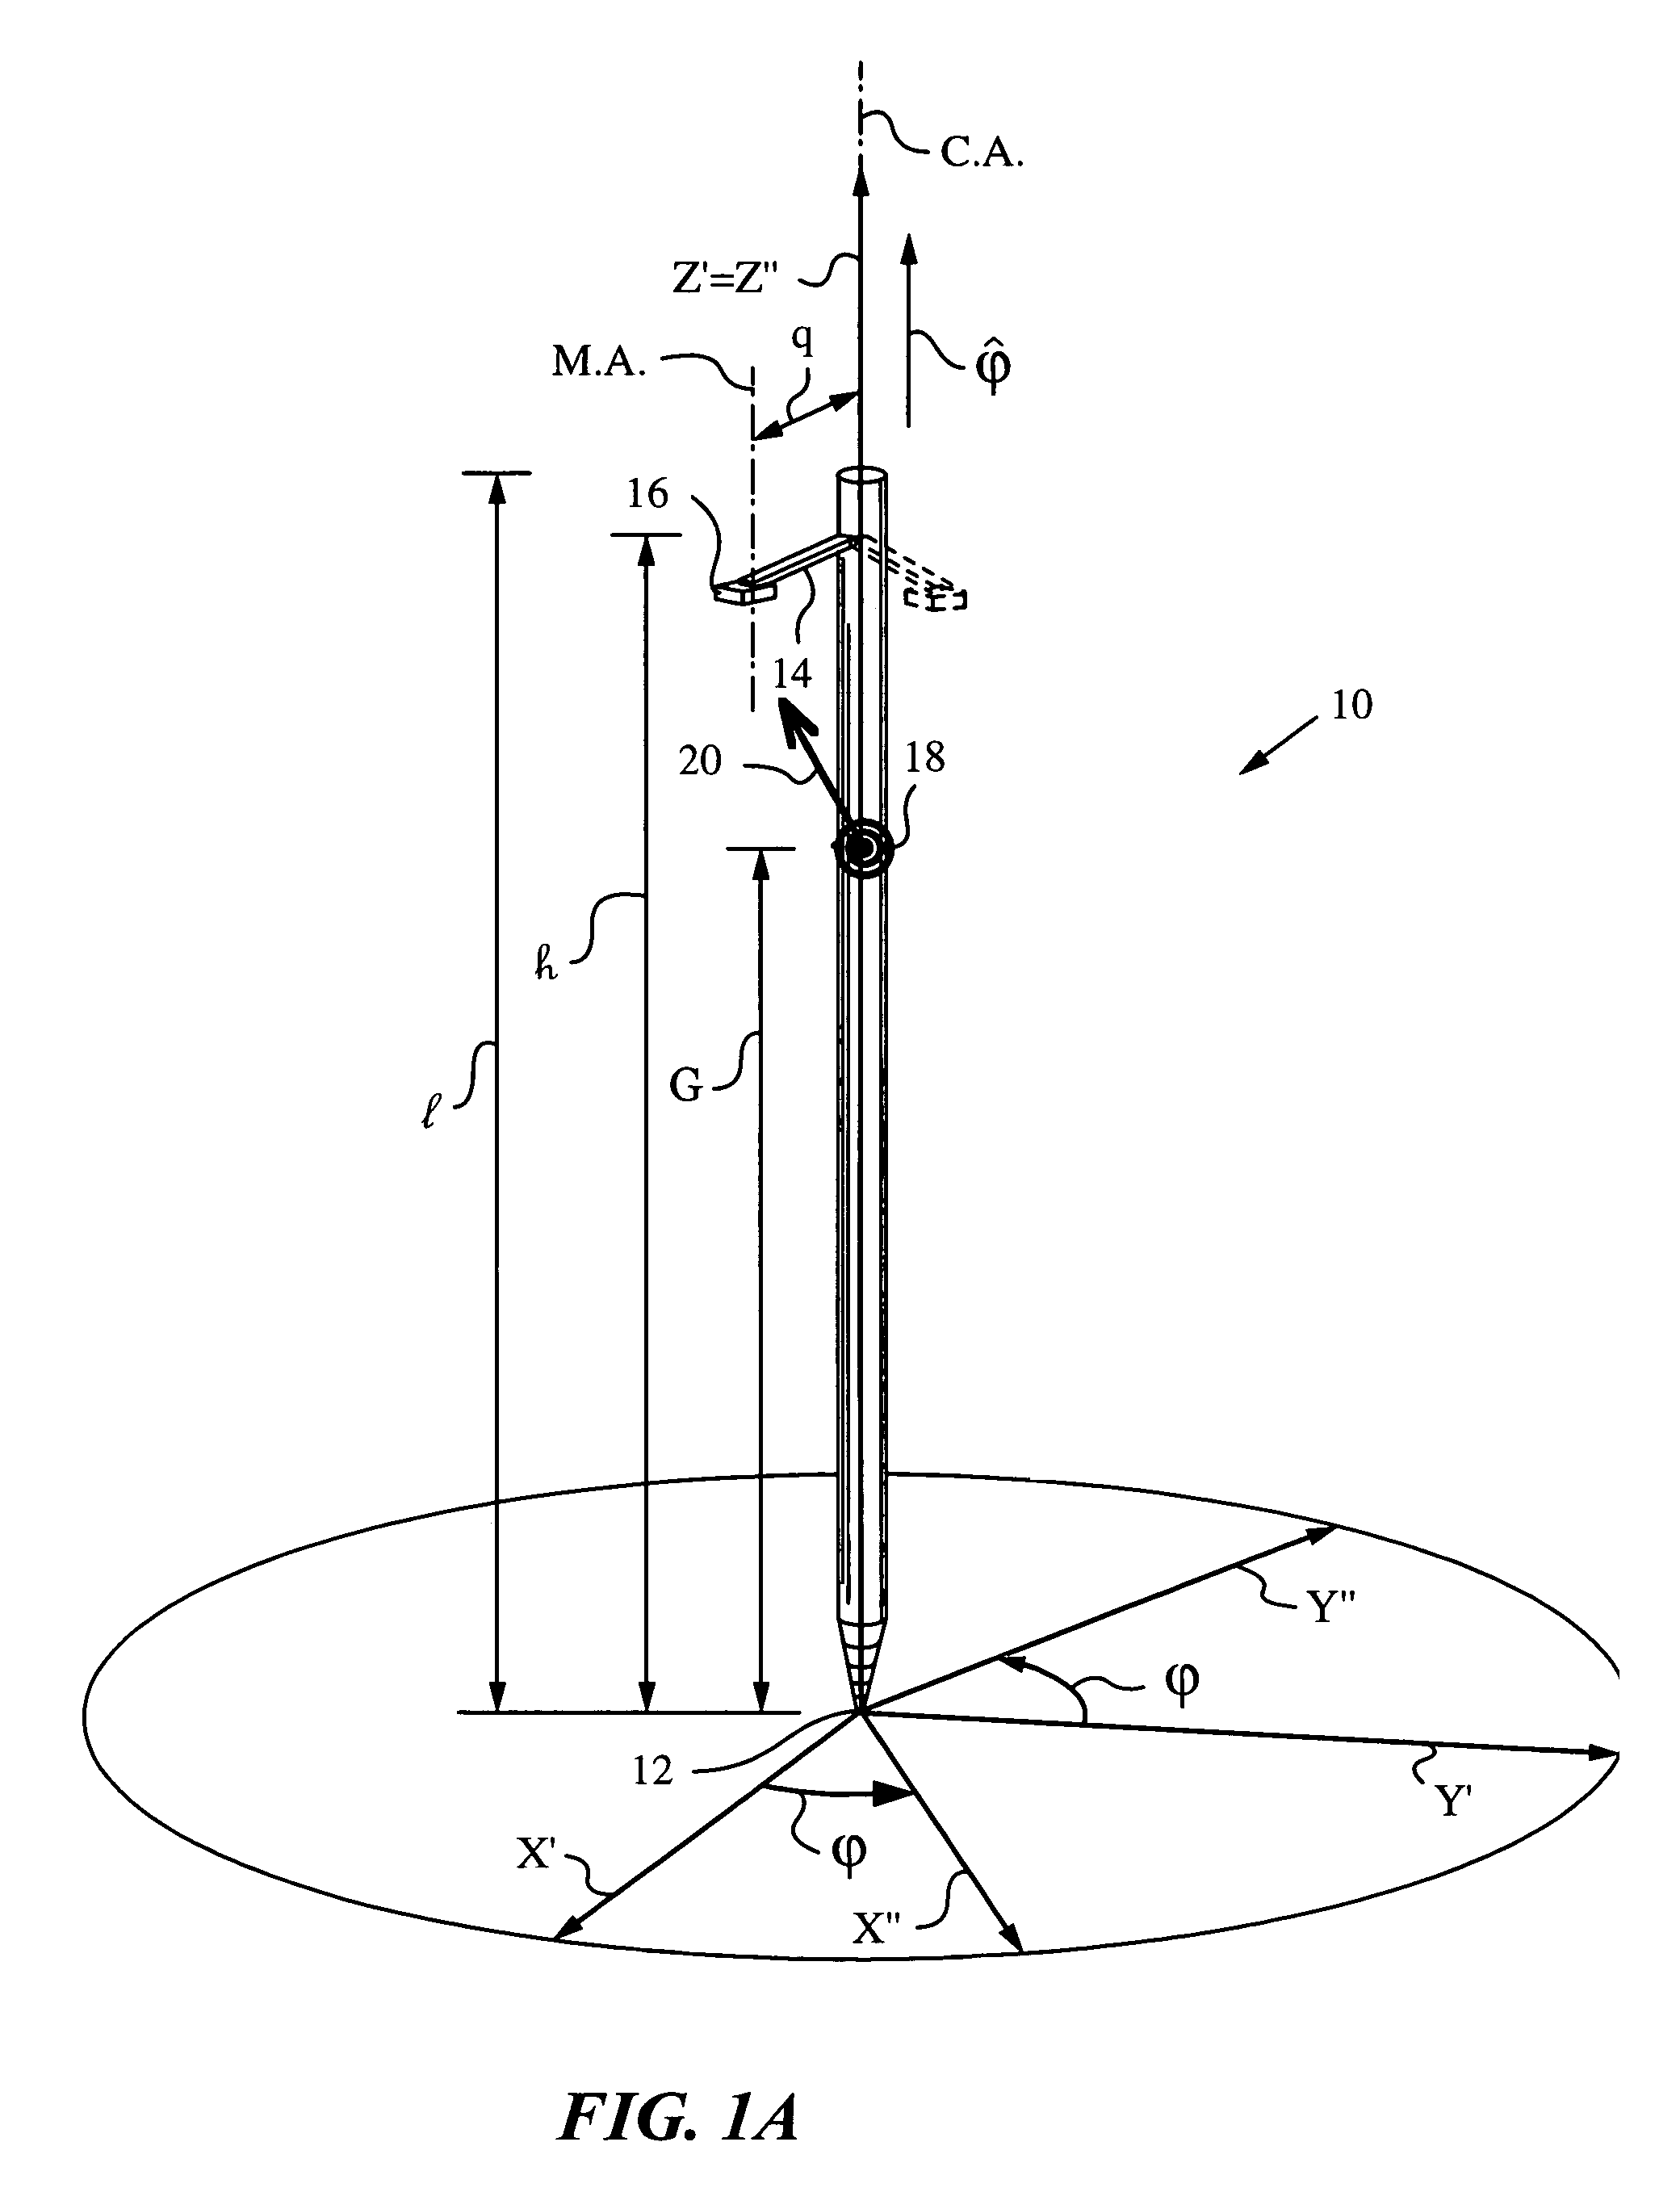 Apparatus and method for determining an inclination of an elongate object contacting a plane surface